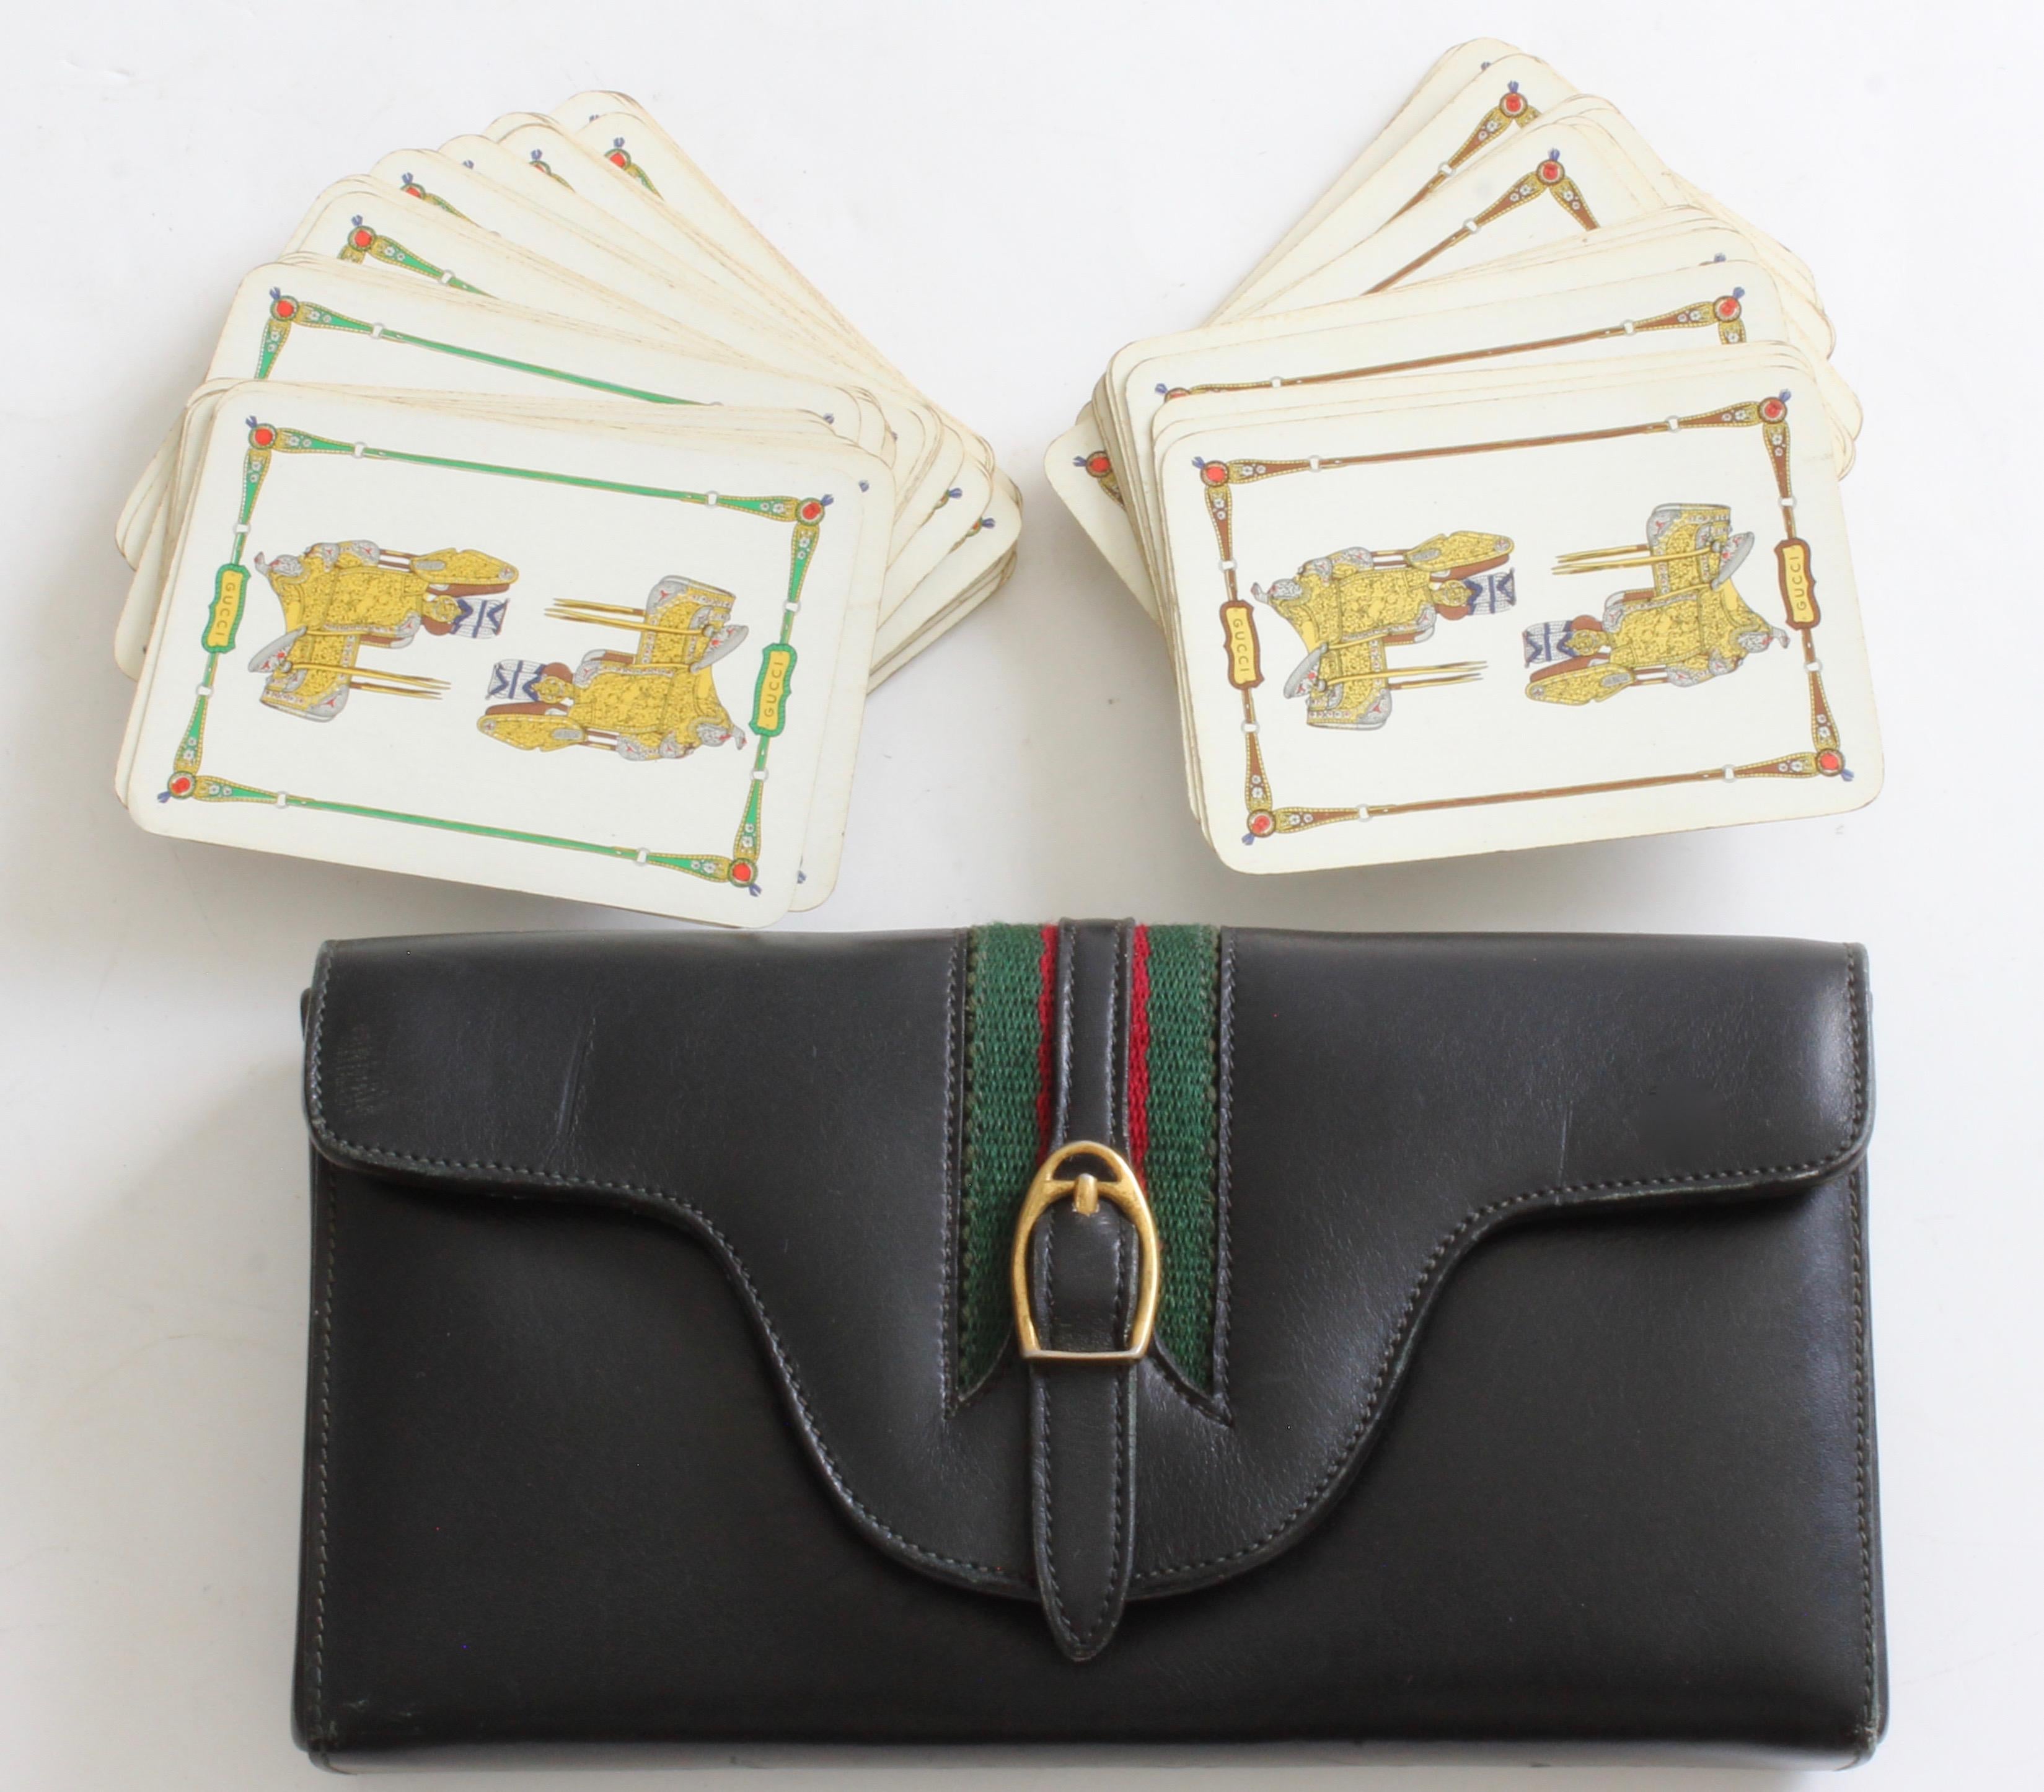 This vintage game set was made by Gucci, most likely in the late 1970s.  The case is made from black leather and features their signature webbing at the center with an equestrian buckle. Inside, the case is fully-lined in black leather and features